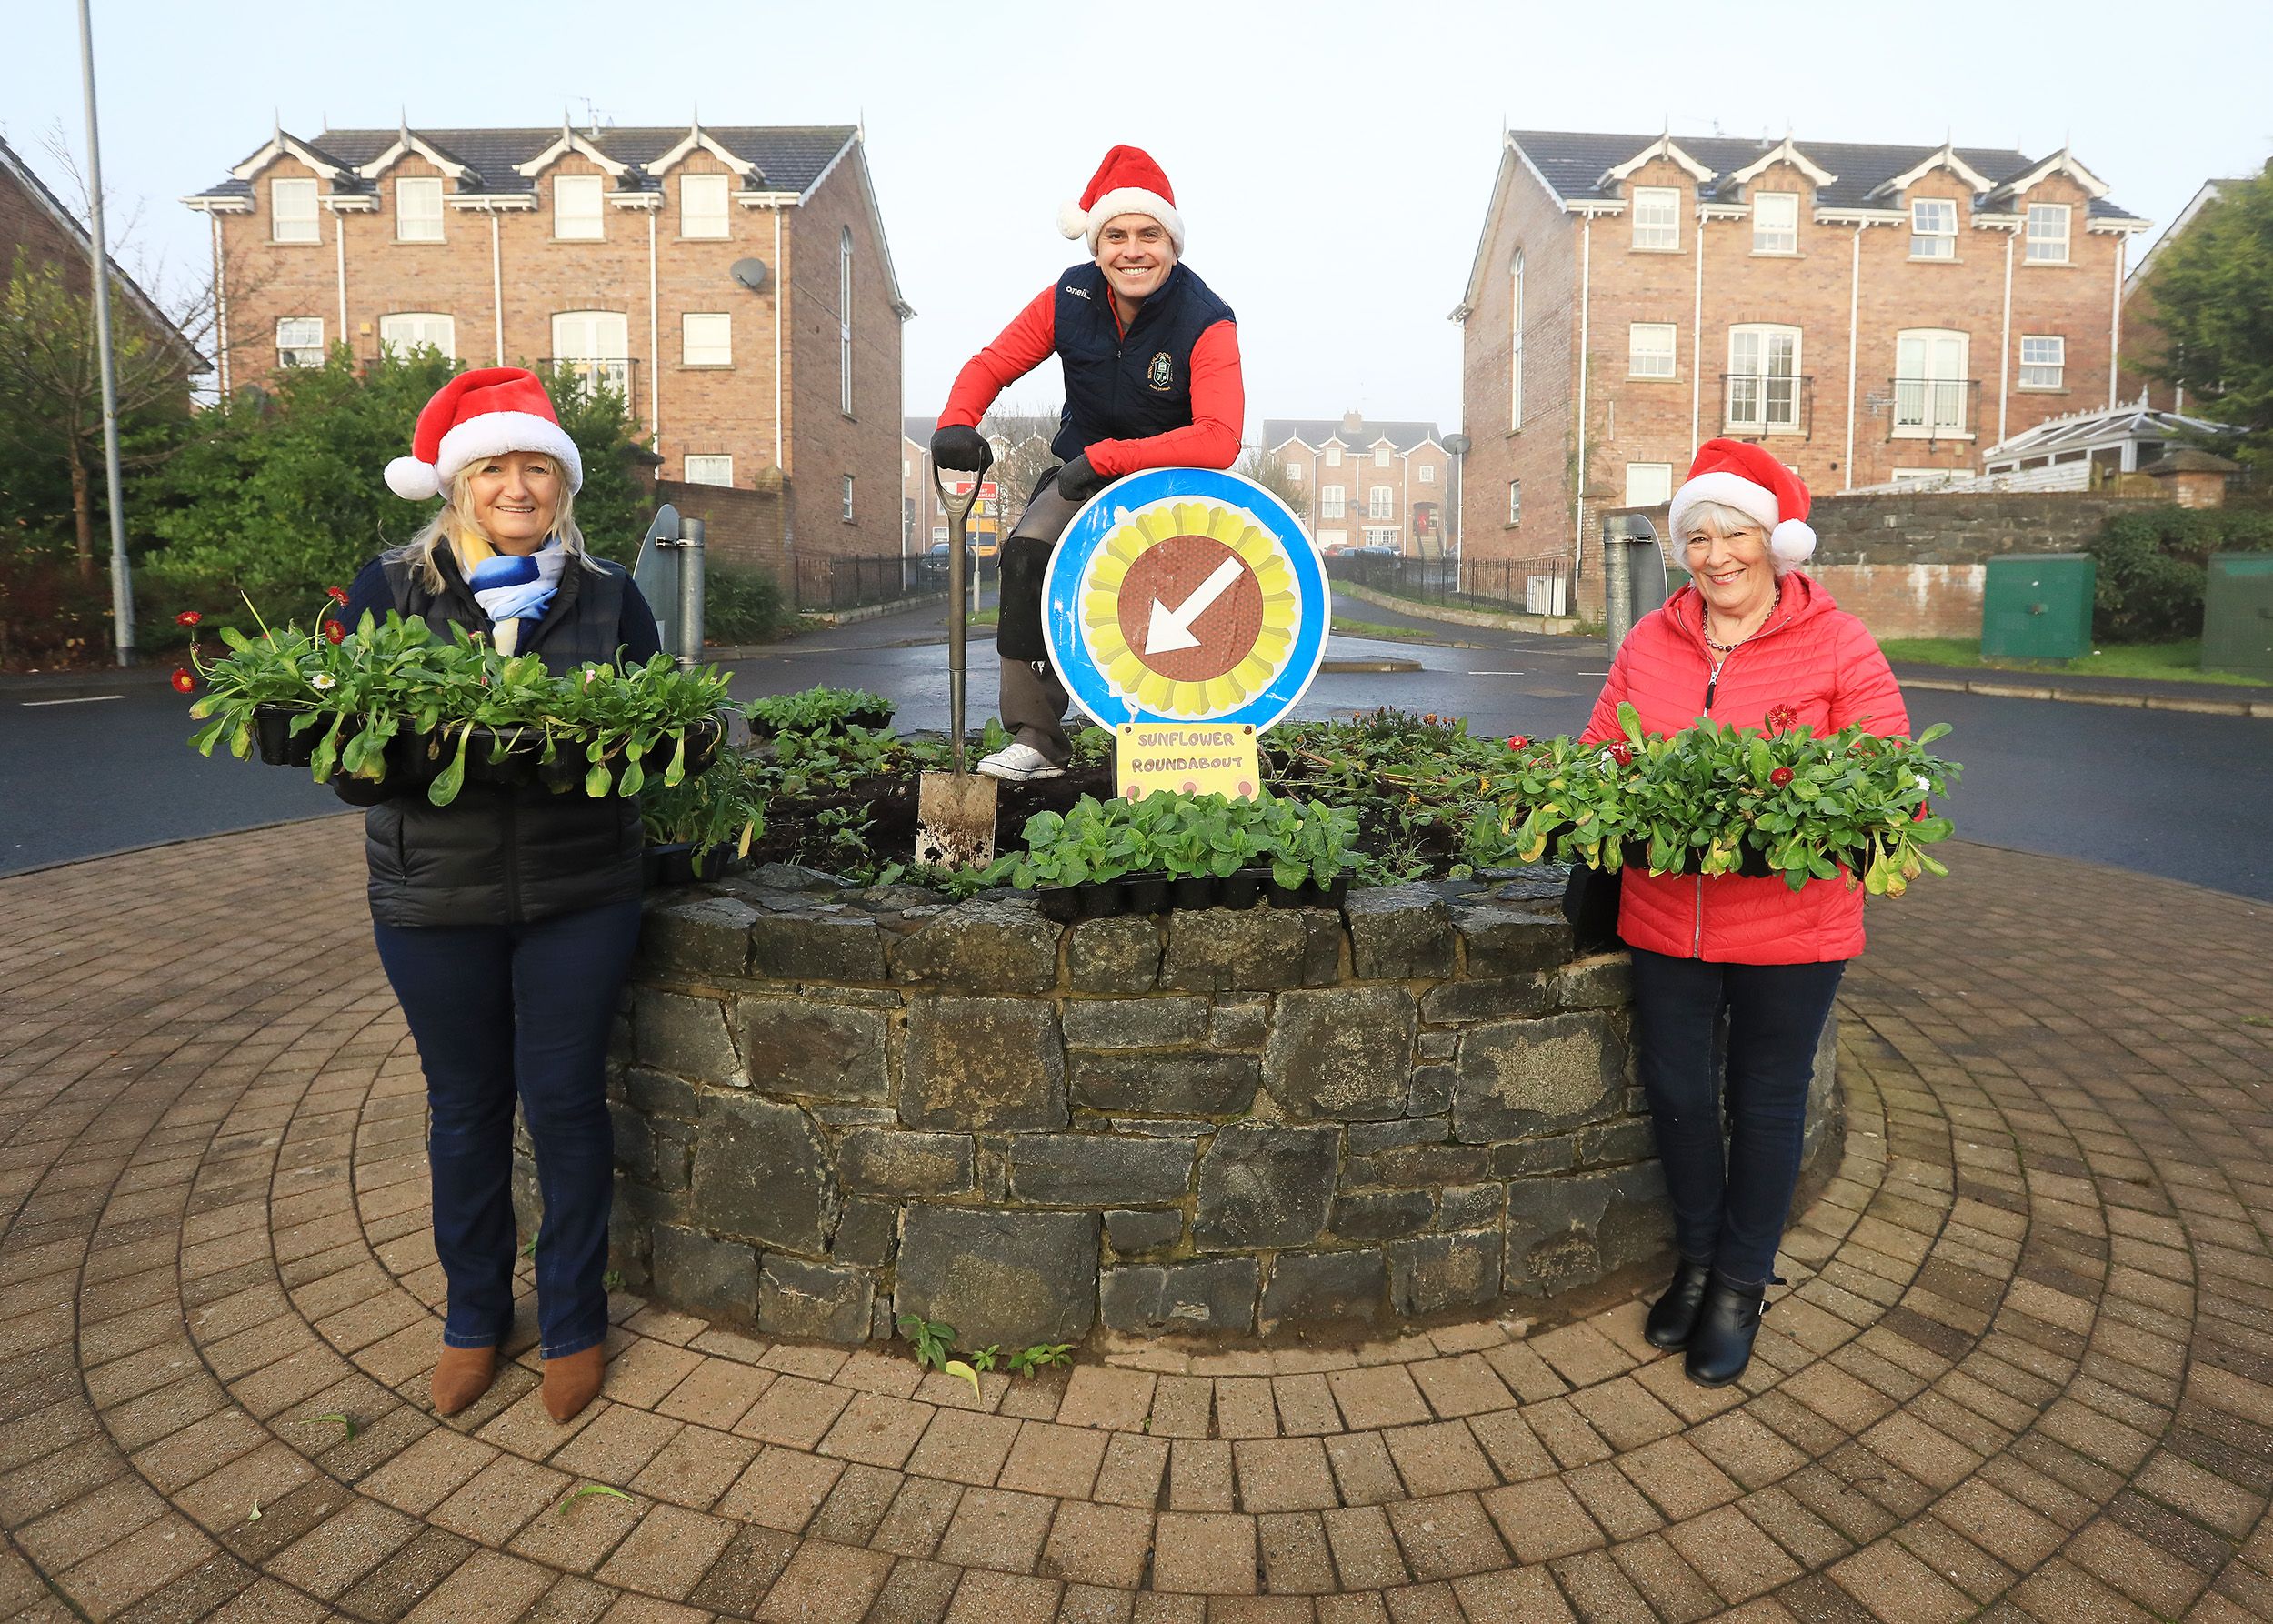 NOLLAIG SHONA: Mount Eagles, Sunflower Roundabout Christmas Tree. Pictured: Councillor Danny Baker with Joan Carville and Eileen Bell from the Mount Eagles/Lagmore Youth and Community Association